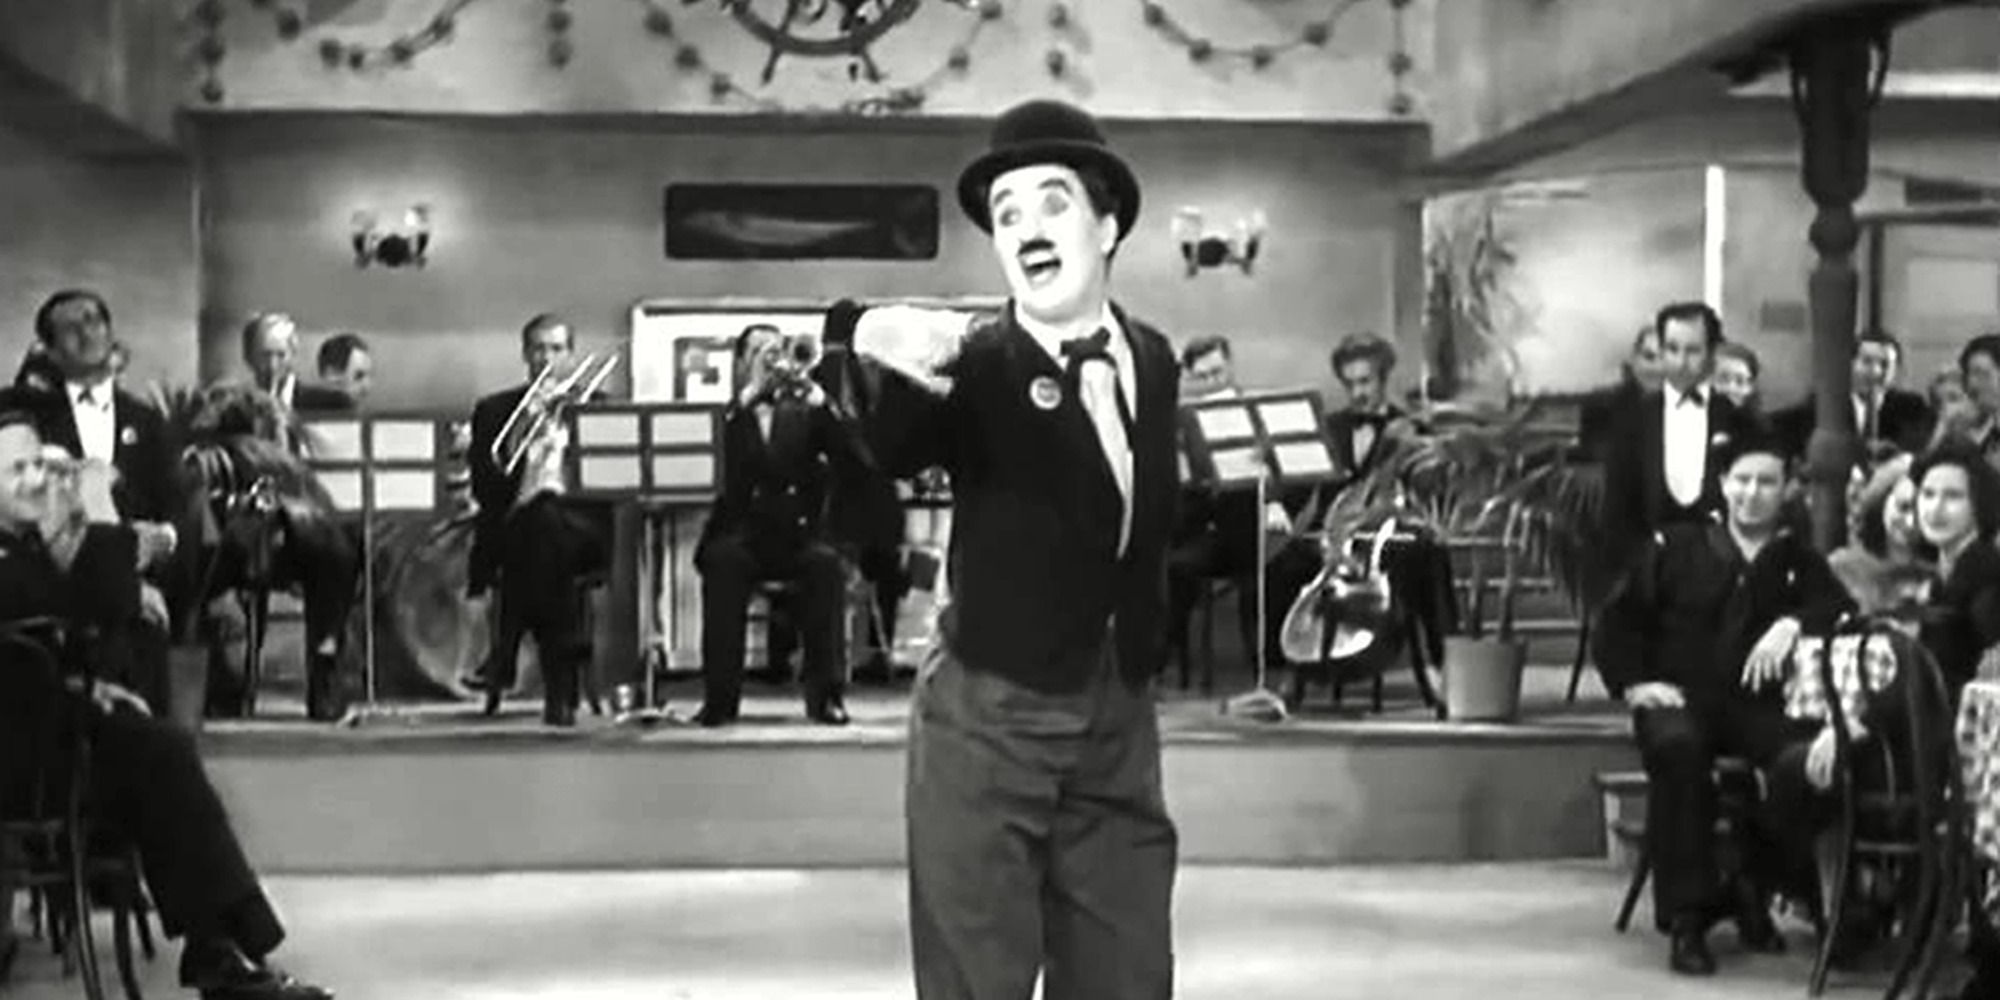 The Tramp singing a song in Modern Times with a band playing behind him and a crowd watching